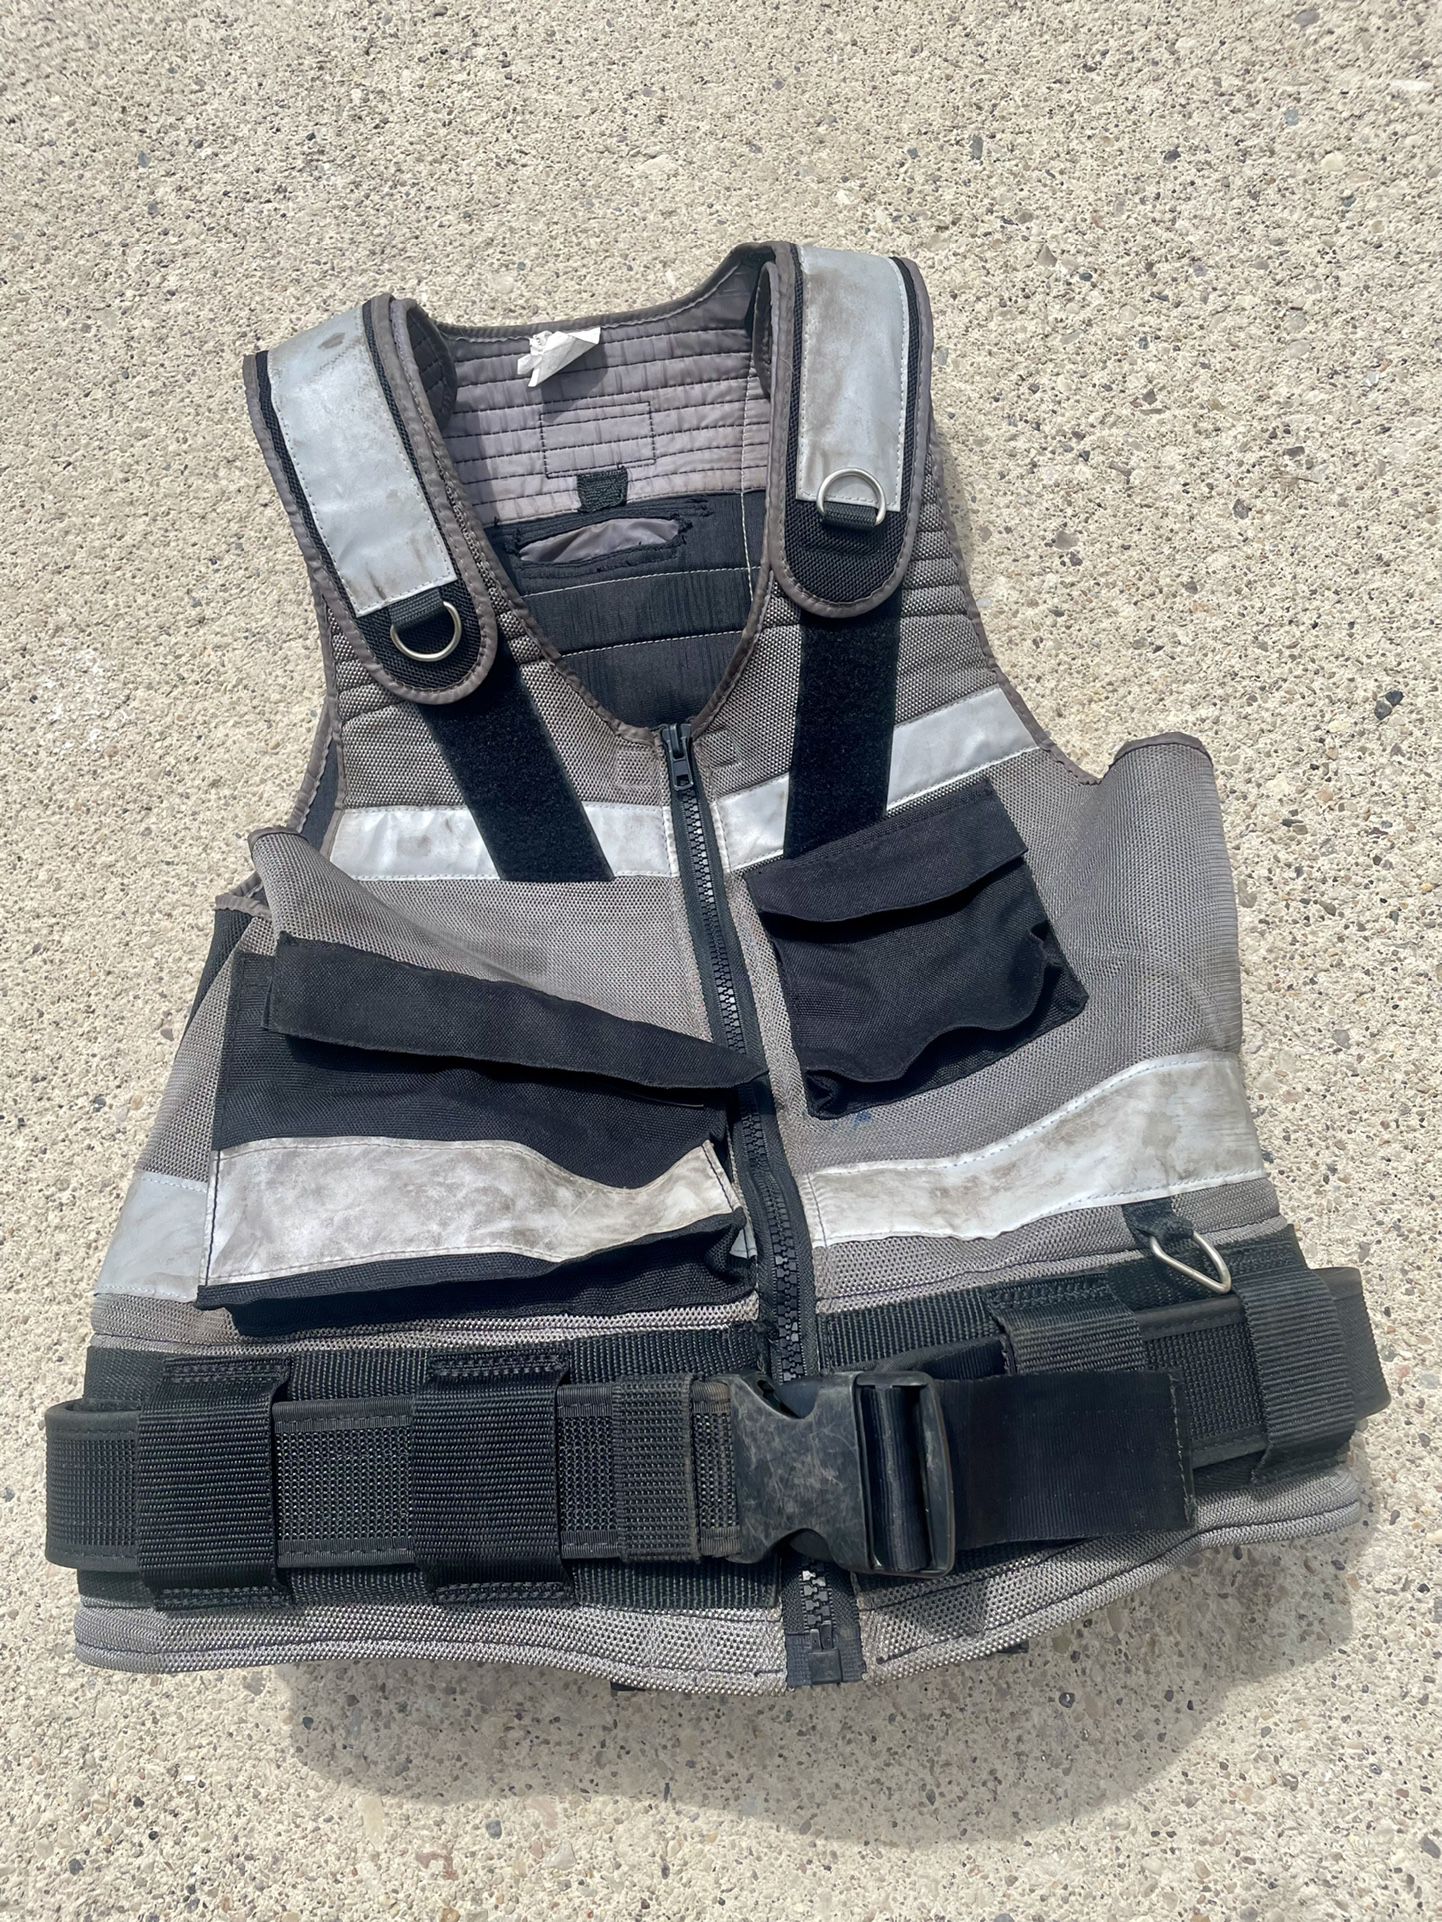 Cwg Underground Mineing Vest. These Are Hard To Find Especially In This Condition Only Used 6 Times